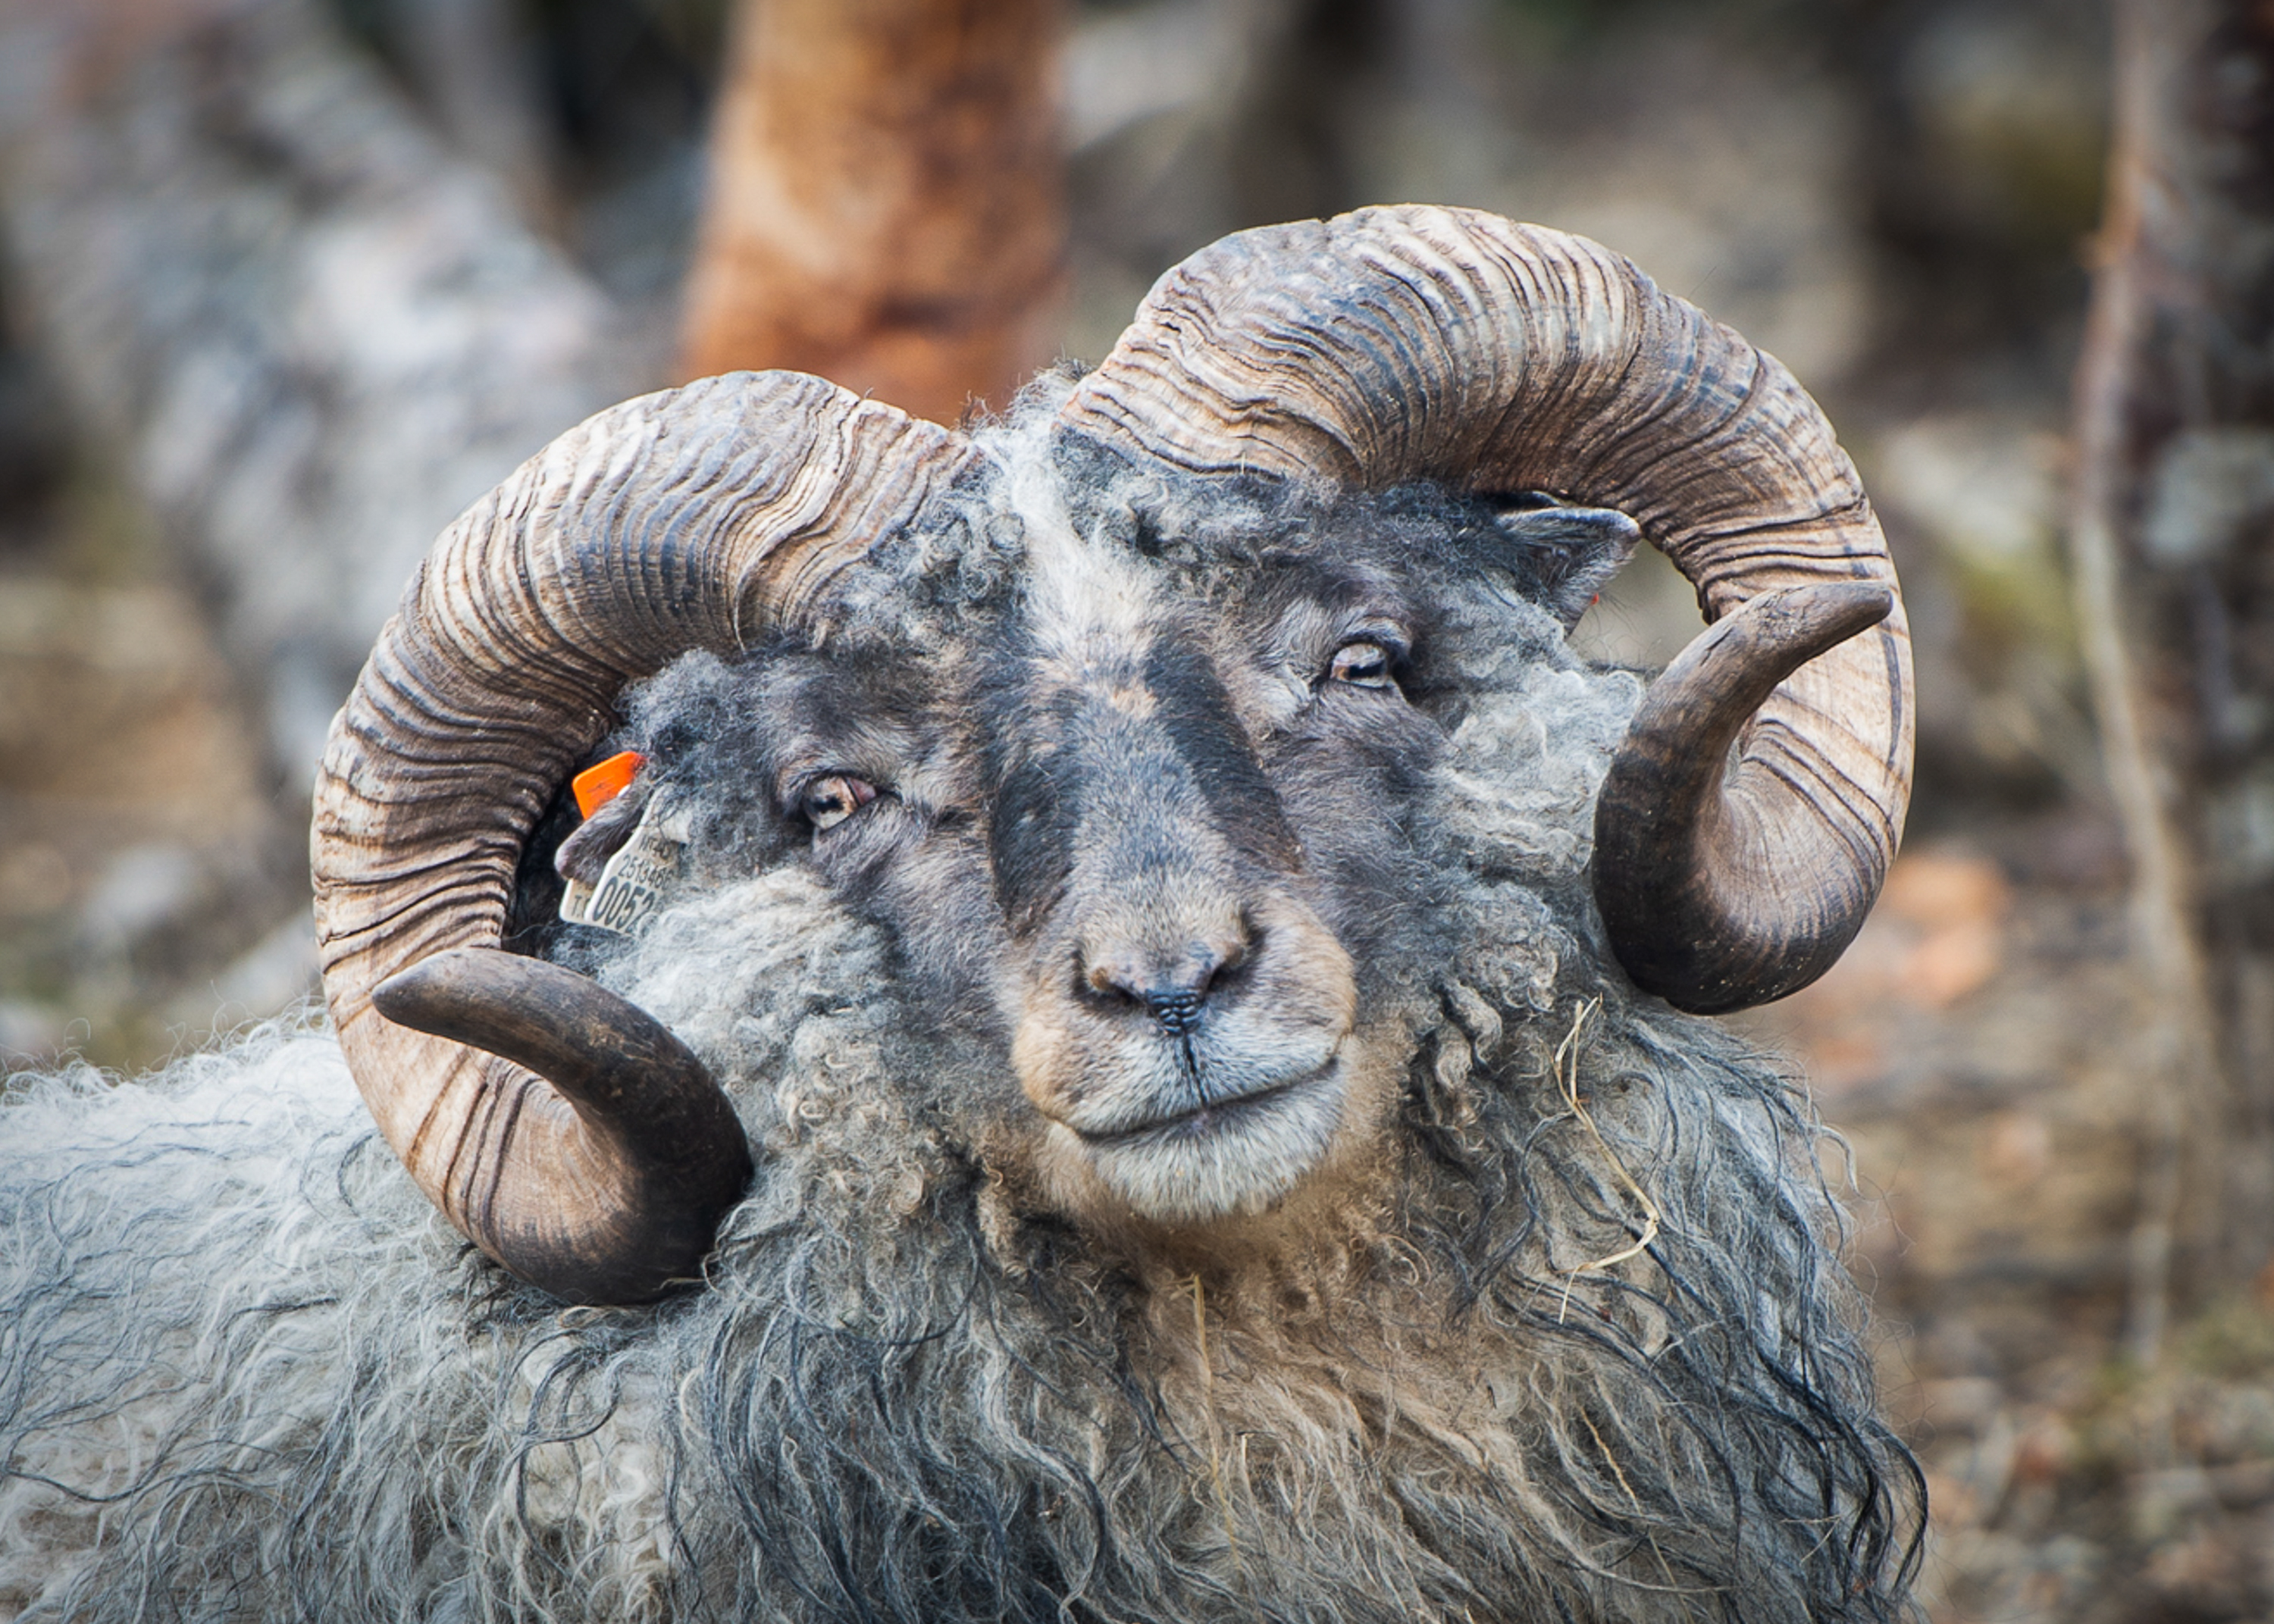 Old Norwegian spælsau, among the most original of the national sheep breeds in Norway (Photo: Åse Tronstad)